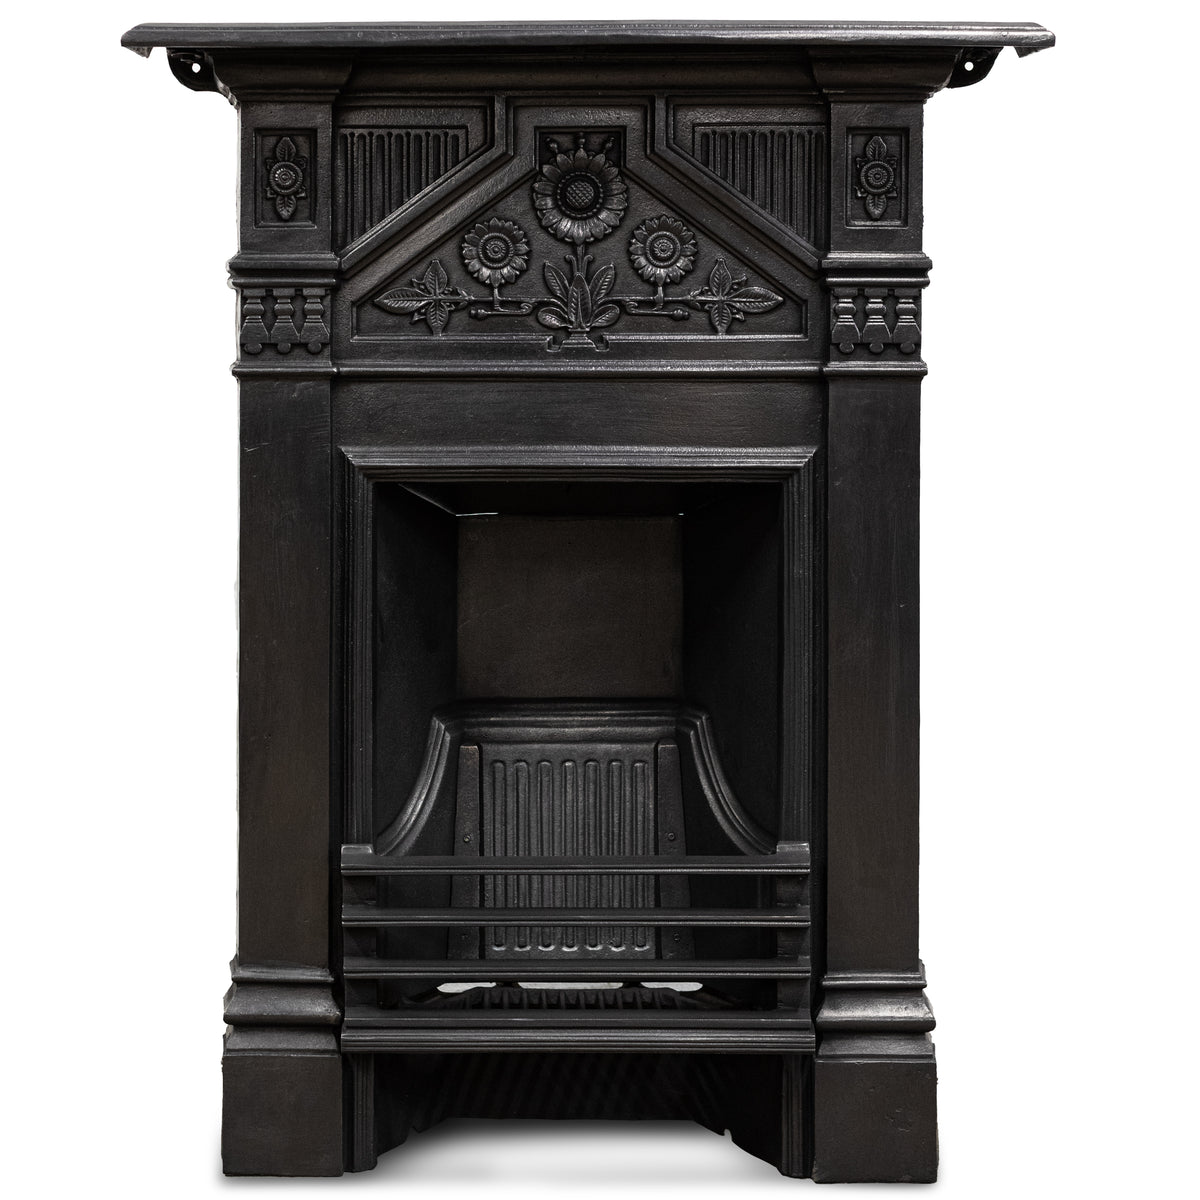 Antique Iron Combination Fireplace With Sunflowers | The Architectural Forum